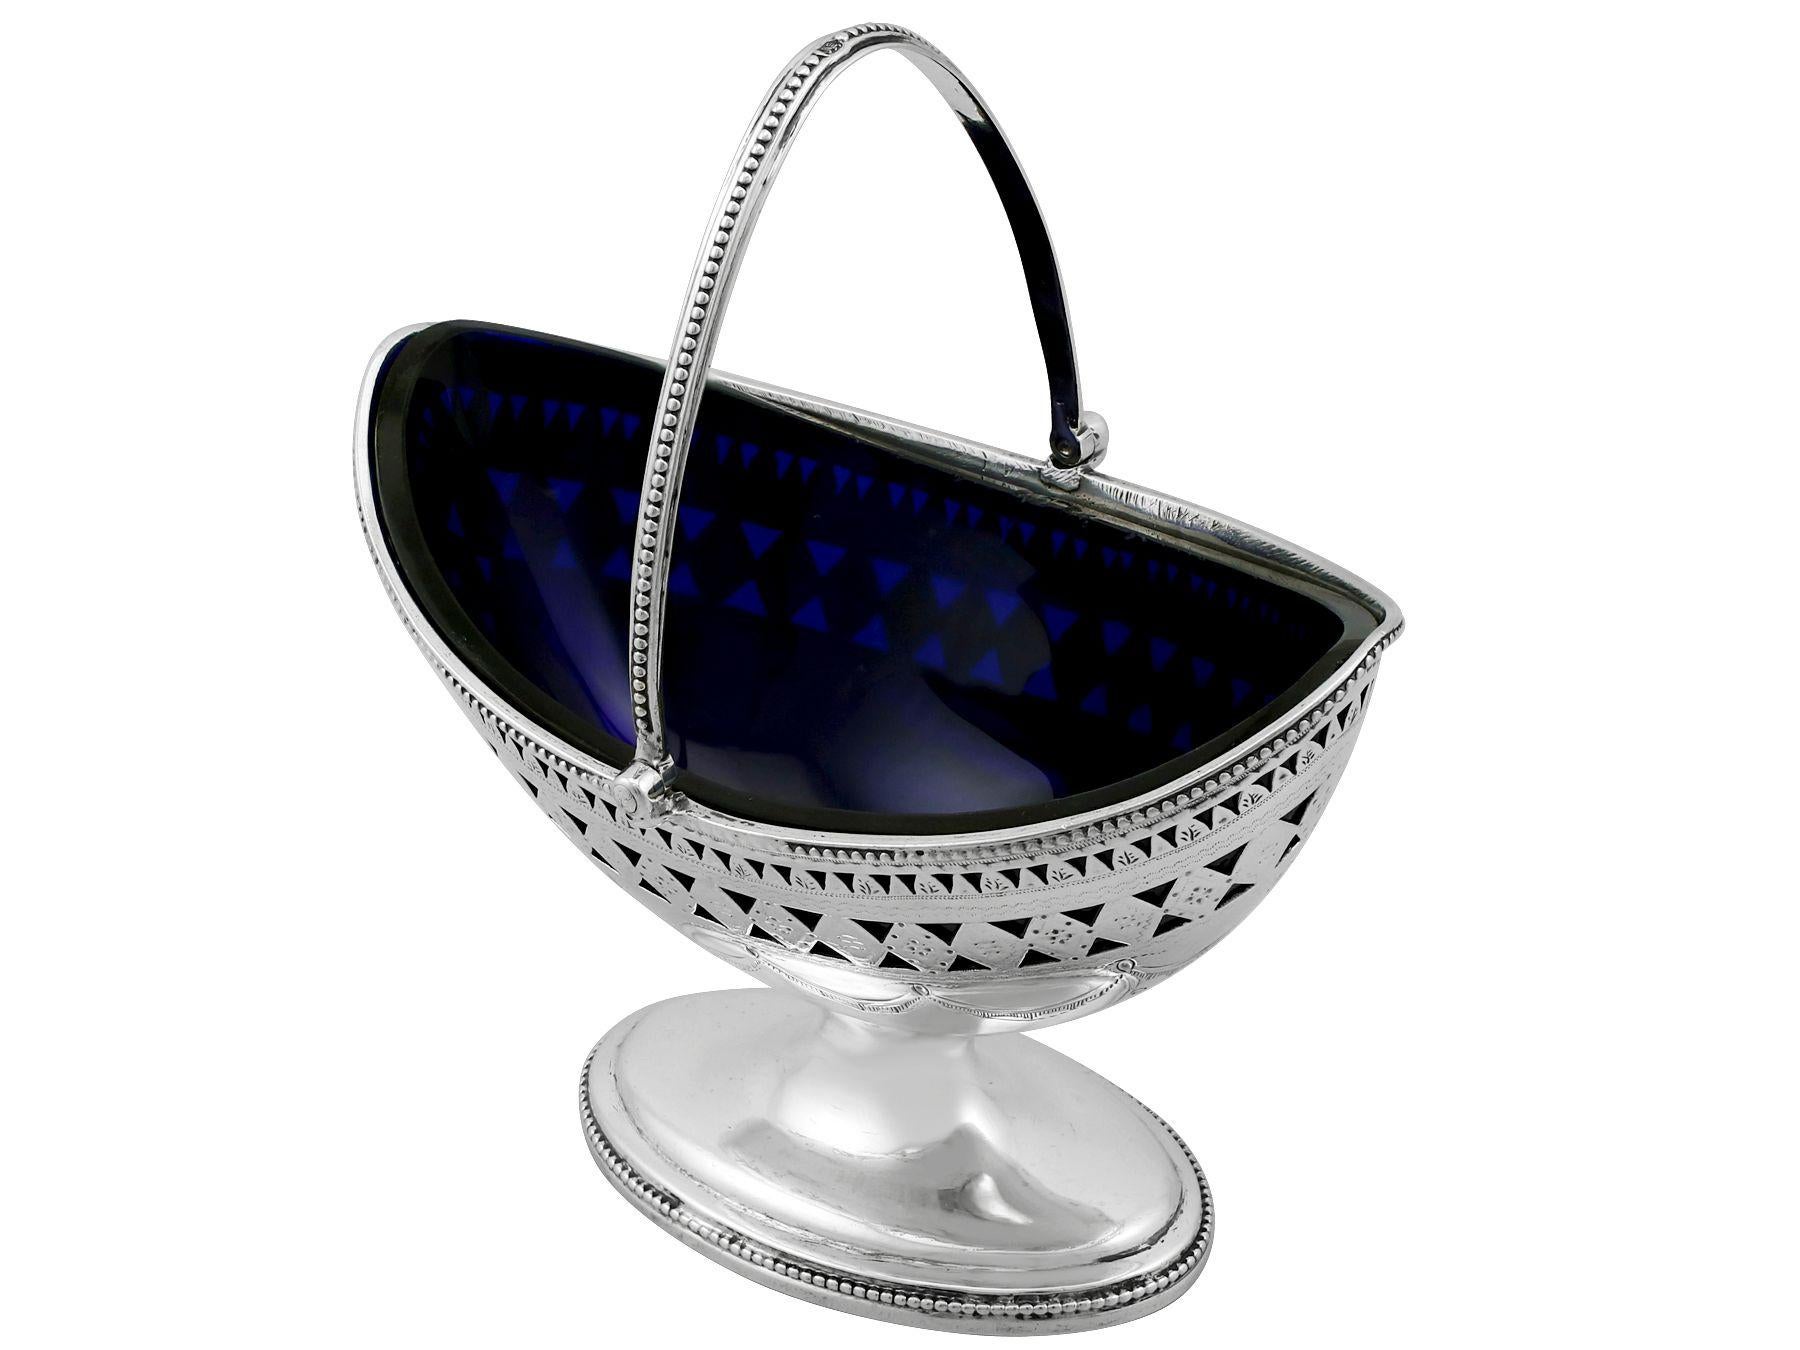 Antique 1809 Georgian English Sterling Silver Sugar Basket In Good Condition For Sale In Jesmond, Newcastle Upon Tyne